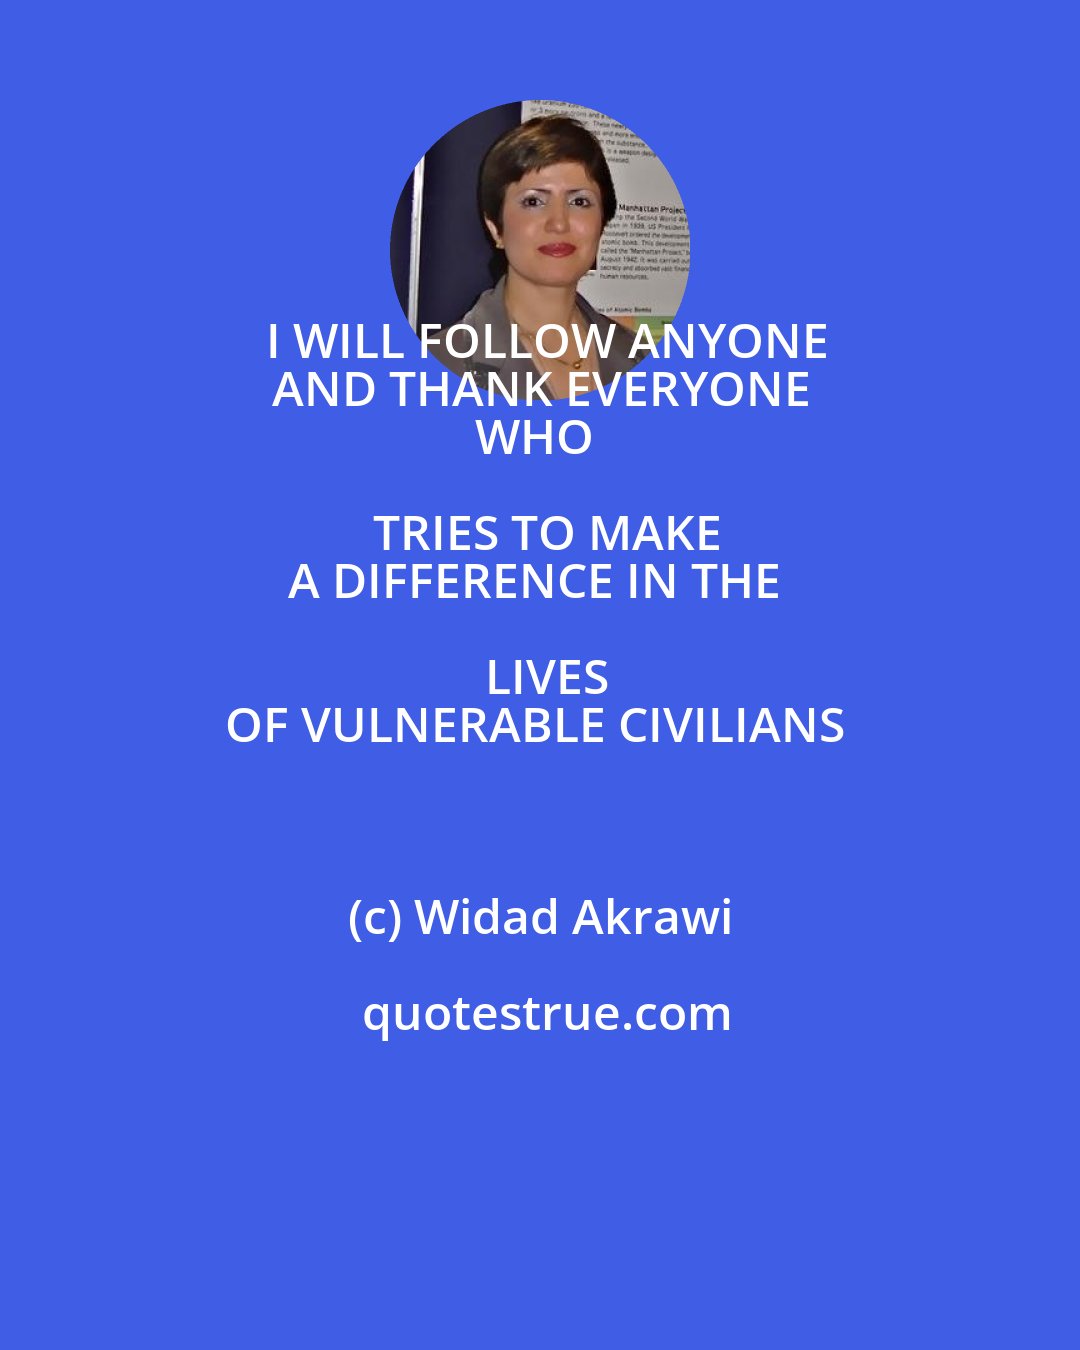 Widad Akrawi: I WILL FOLLOW ANYONE
AND THANK EVERYONE
WHO TRIES TO MAKE
A DIFFERENCE IN THE LIVES
OF VULNERABLE CIVILIANS